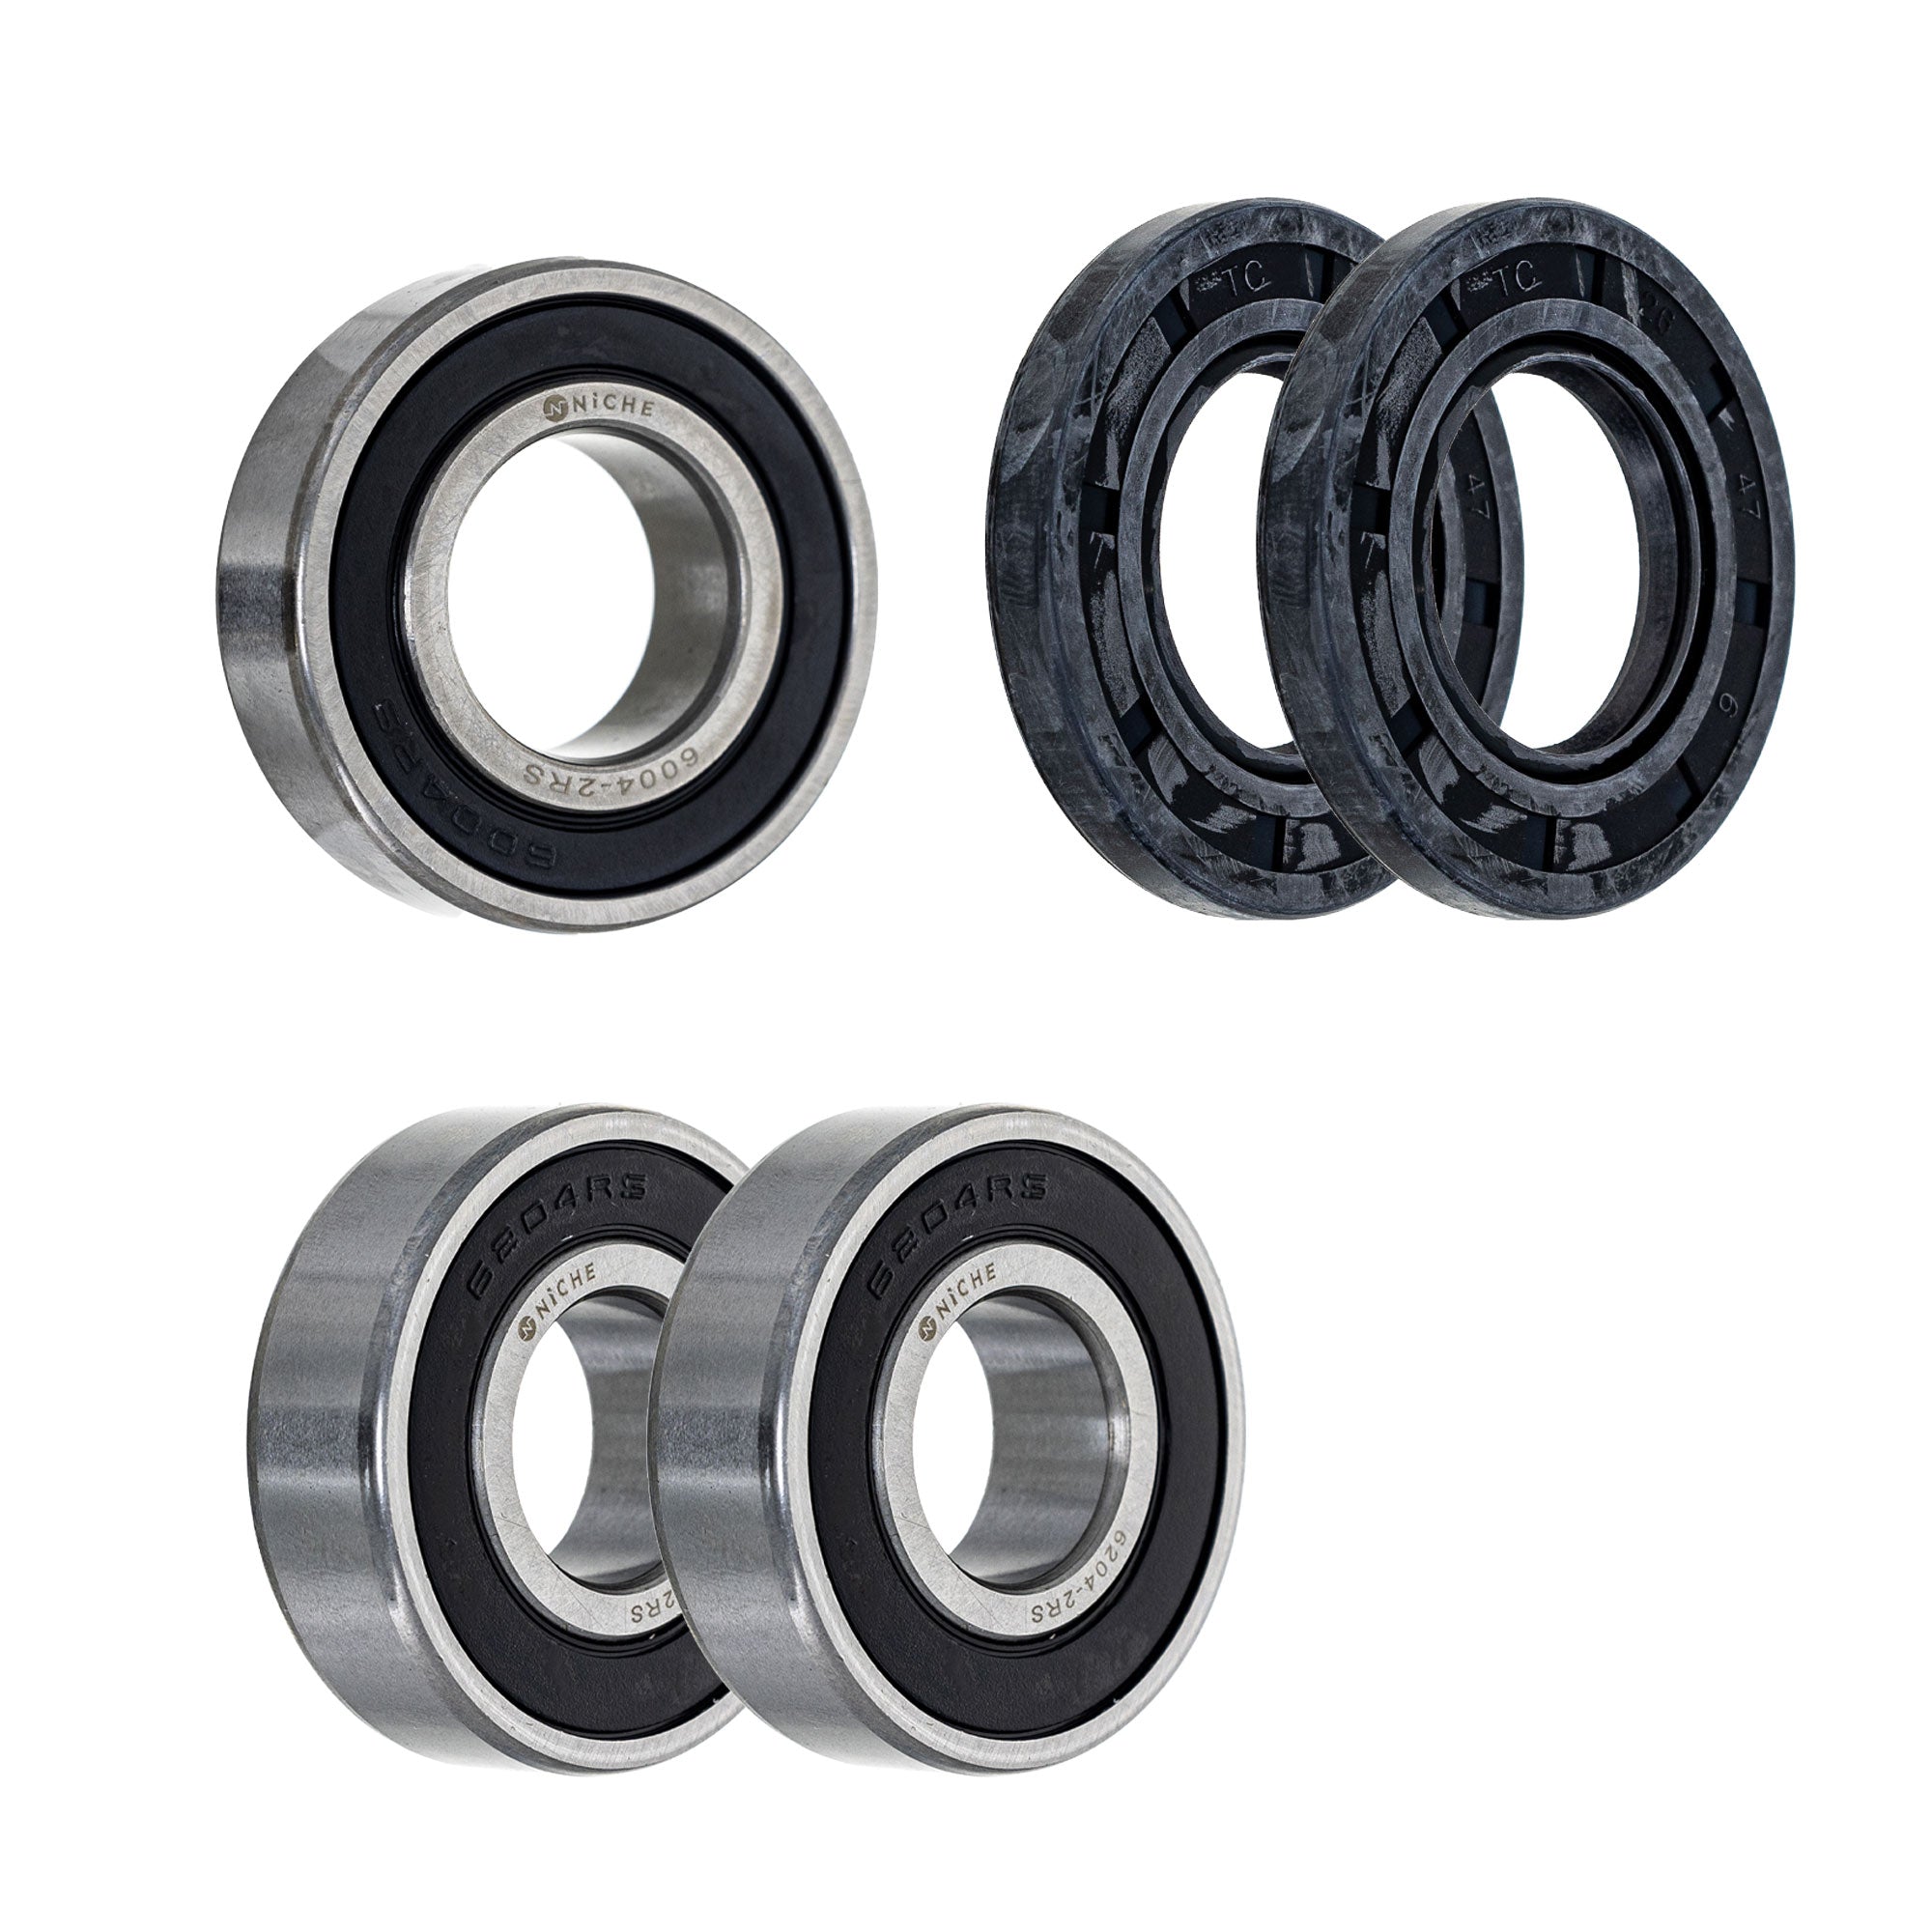 Wheel Bearing Seal Kit for zOTHER Ref No RMX250 RM250 NICHE MK1008995